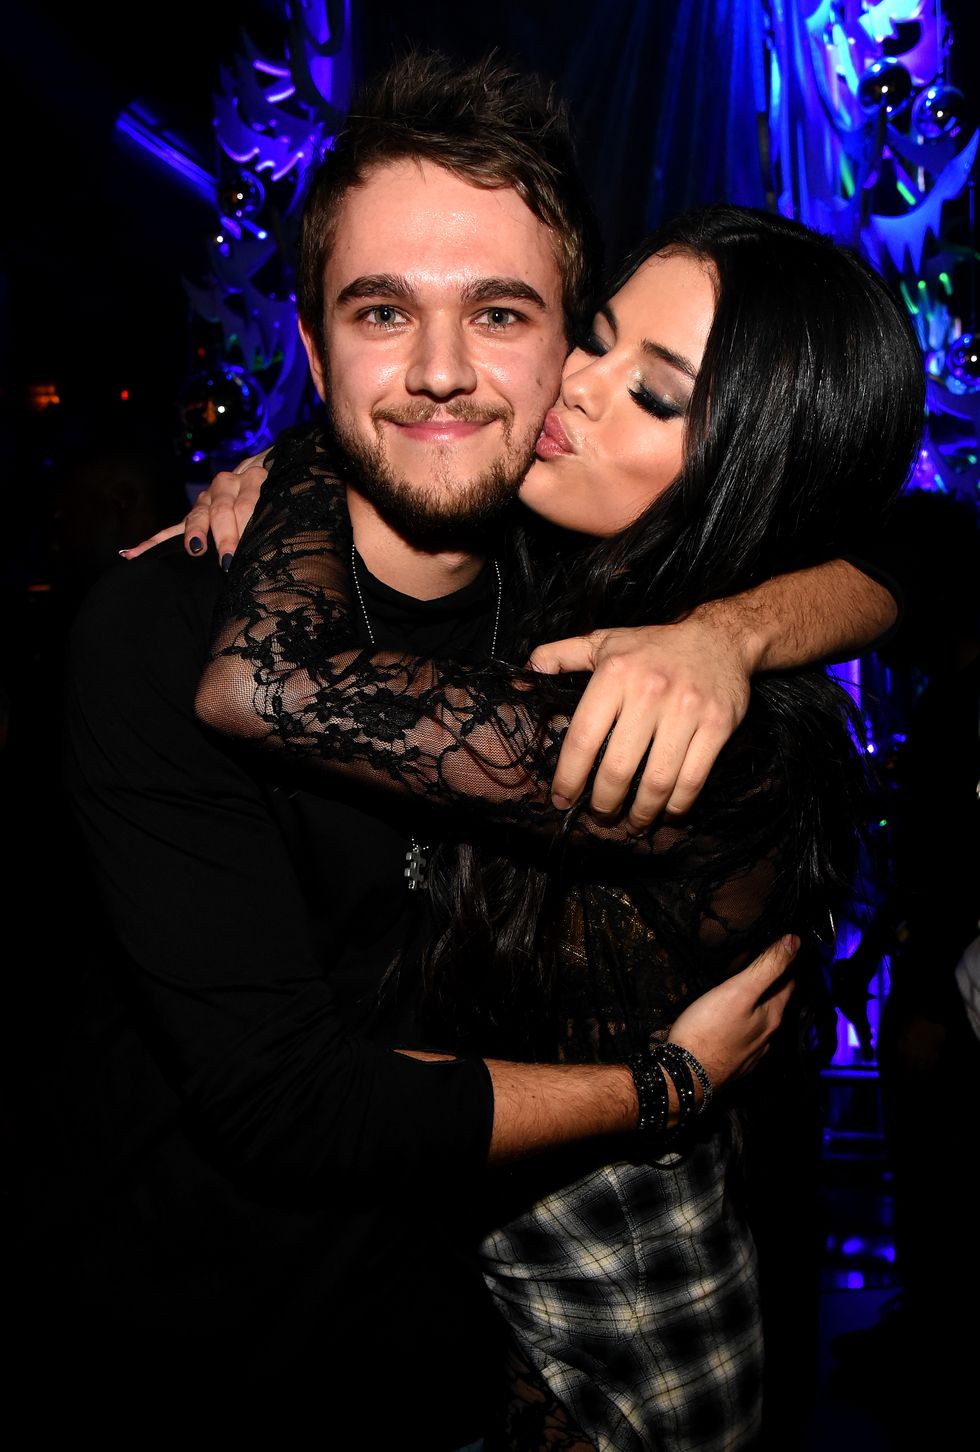 new york, ny   december 11  zedd and selena gomez attend z100s jingle ball 2015 at madison square garden on december 11, 2015 in new york city  photo by kevin mazurgetty images for iheartmedia